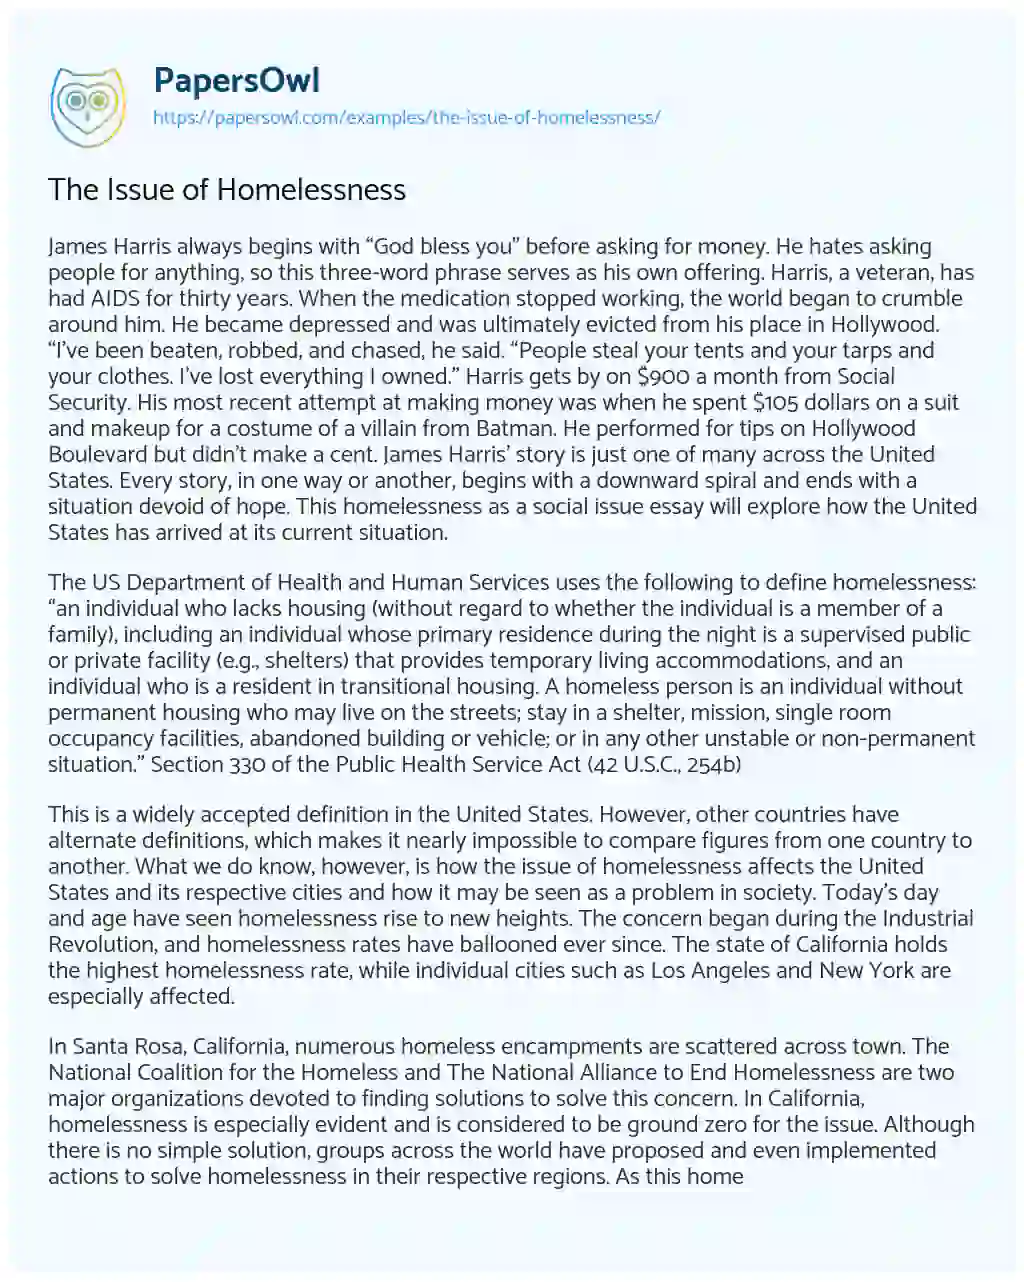 The Issue of Homelessness essay